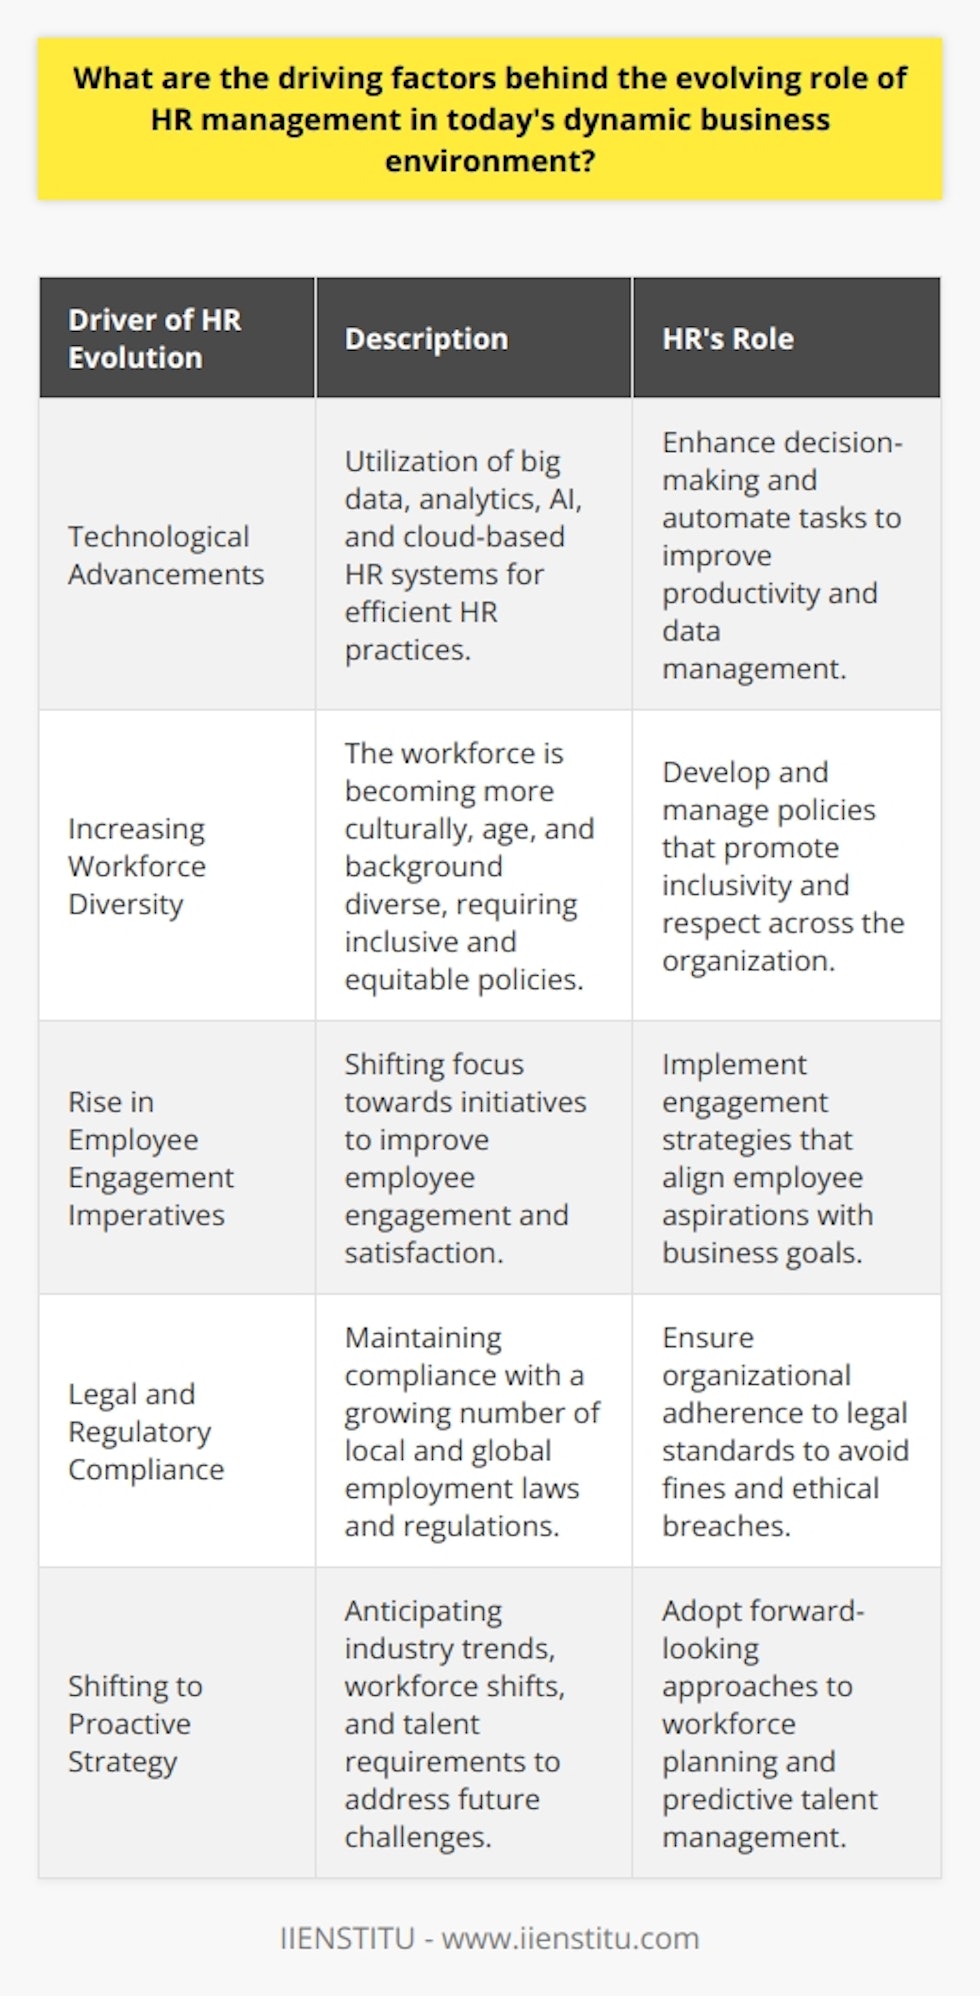 The landscape of Human Resources (HR) is ever-changing, compelled by several factors that push for innovation and strategic involvement in the broader scopes of business. The role of HR has transcended beyond traditional practices due to the following key drivers:Technological AdvancementsOne of the most significant evolutions in HR management is the adaptation to technological innovation. From harnessing the power of big data and analytics to improve decision-making, to utilizing Artificial Intelligence (AI) for automating repetitive tasks, technology has revamped how HR works. Cloud-based HR systems and sophisticated Human Resource Management Systems (HRMS) facilitate real-time, data-driven decision-making and foster efficient HR practices including personnel tracking, payroll administration, and benefits management.Increasing Workforce DiversityModern organizations are becoming melting pots of diverse cultures, ages, and professional backgrounds. This shift necessitates HR departments to be more skilled in managing and capitalizing on this diversity. Developing robust policies that foster inclusivity, equity, and respect across the organization is now a cornerstone of HR management. Handling diverse perspectives and work styles requires HR professionals to be astute in conflict resolution and adept at constructing a cohesive company culture that unifies the entire workforce.Rise in Employee Engagement ImperativesEngaged employees are often synonymous with productive and loyal employees. Thus, HR's focus has greatly shifted towards initiatives that drive engagement. This involves not only monetary rewards but also other dimensions like professional development opportunities, recognition programs, and fostering a positive work culture. HR management now plays a critical role in sculpting environments that align employee aspirations with business objectives.Legal and Regulatory ComplianceAn increasingly complex regulatory environment means HR must be ever-vigilant and compliant with local and global employment laws. From data protection regulations to labor law amendments, staying updated with such changes is imperative for HR professionals. This ensures the organization doesn't incur fines, legal action, or brand damage due to non-compliance. Moreover, efficient compliance fosters ethical business practices, which have become a key consideration for stakeholders and consumers alike.Shifting to Proactive StrategyIn the past, HR might have taken a more reactive posture, tackling issues as they occur. In contrast, the modern HR role is to anticipate industry trends, workforce shifts, and talent requirements. This necessitates a forward-looking approach where HR helps to shape internal policies in anticipation of future challenges. By utilizing predictive analytics and talent forecasting, HR management is better positioned to advise on potential skill gaps, workforce planning, and succession planning.To maintain a competitive edge in this dynamic environment, HR management at IIENSTITU reflects these trends, placing itself at the heart of strategic business operations. By evolving in these key areas, HR not only solidifies its position as a critical business function but also contributes to the sustainable growth and adaptability of the organization it serves. Through continued innovation and a commitment to addressing these drivers, HR is set to remain an indispensable component of the modern business paradigm.